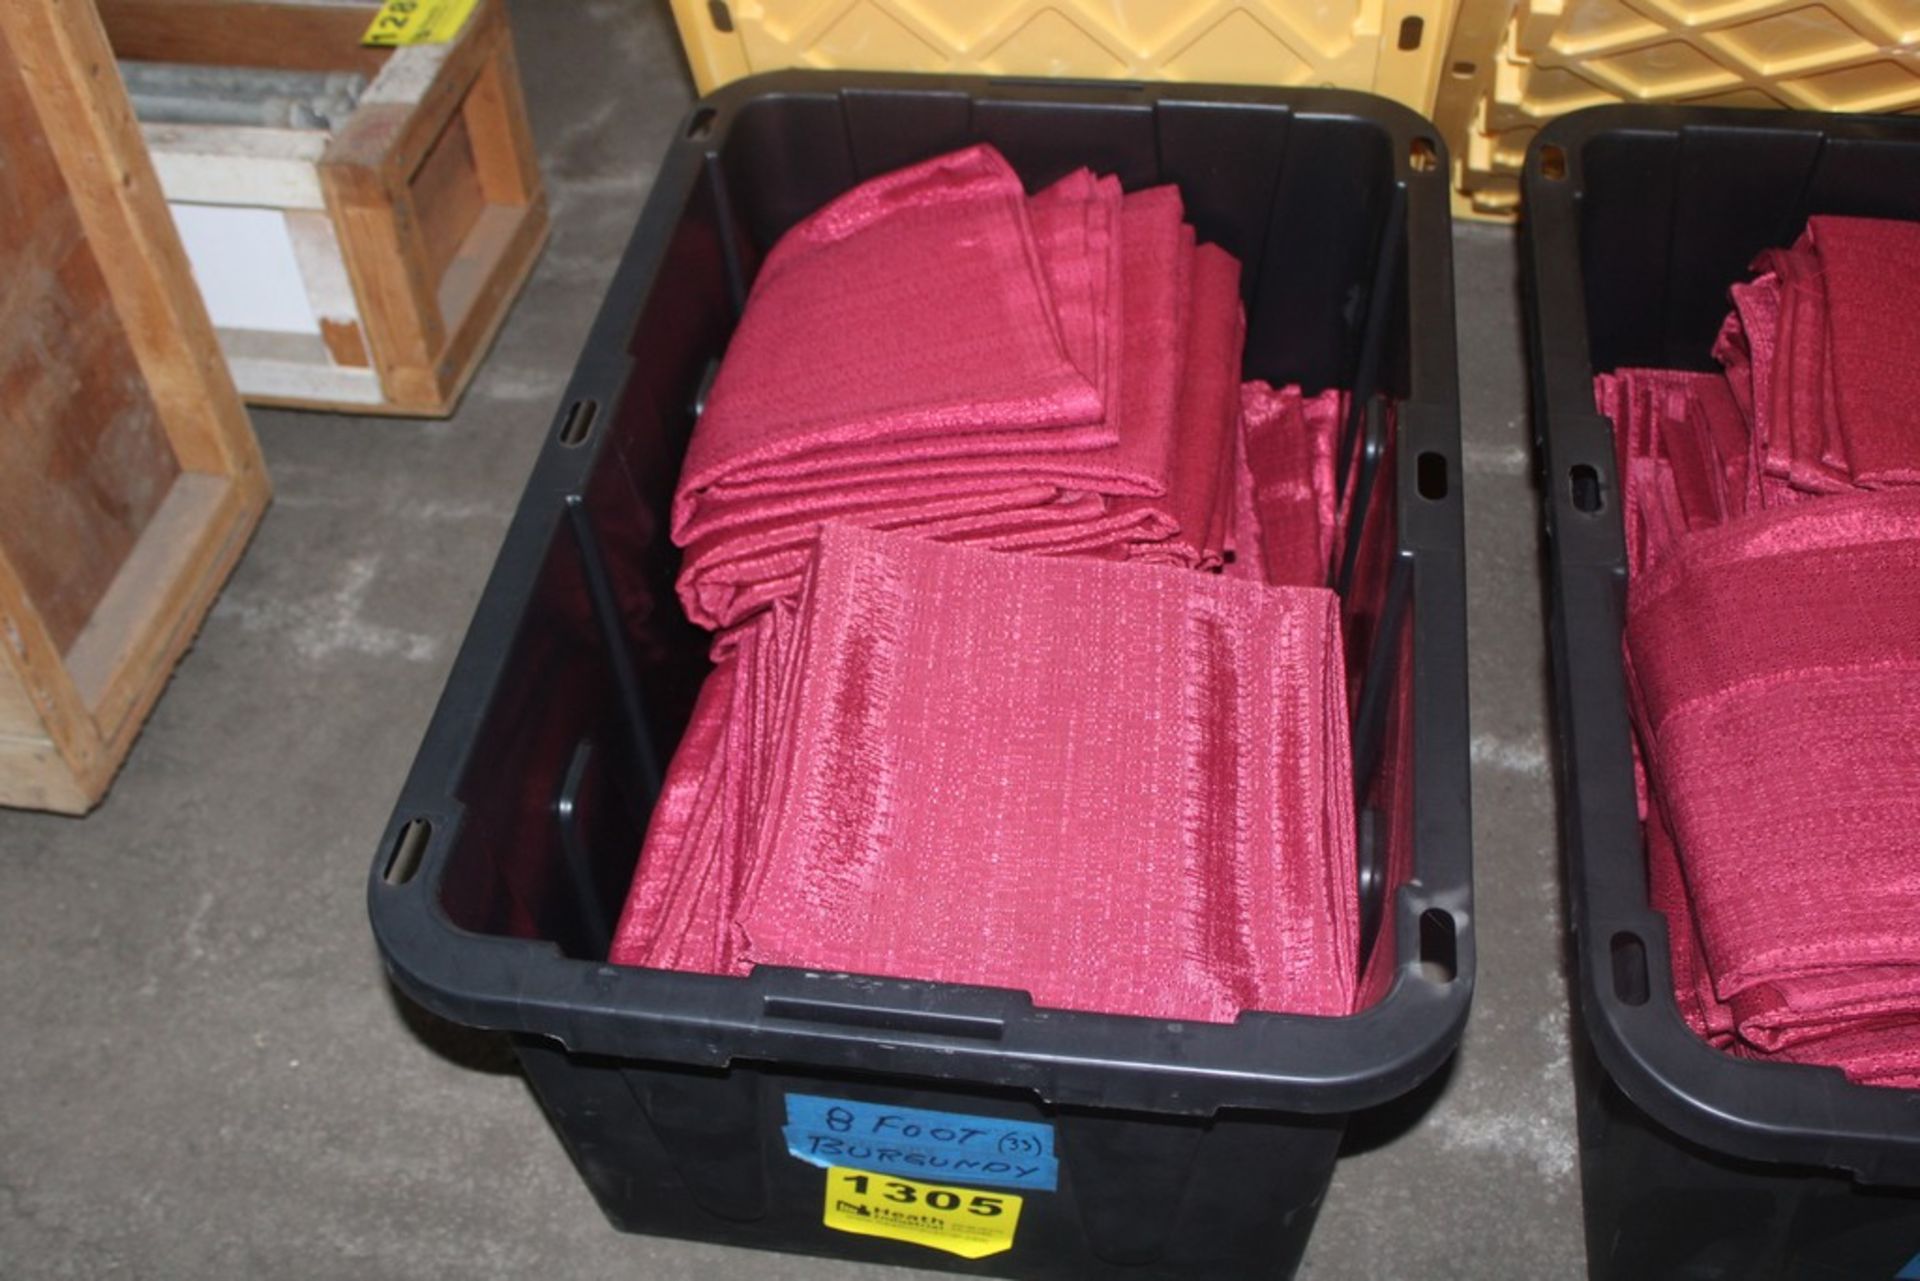 APPROX. (33) 8FT BURGUNDY DRAPES IN TOTE ( QUANTITIES NOT GUARANTEED)